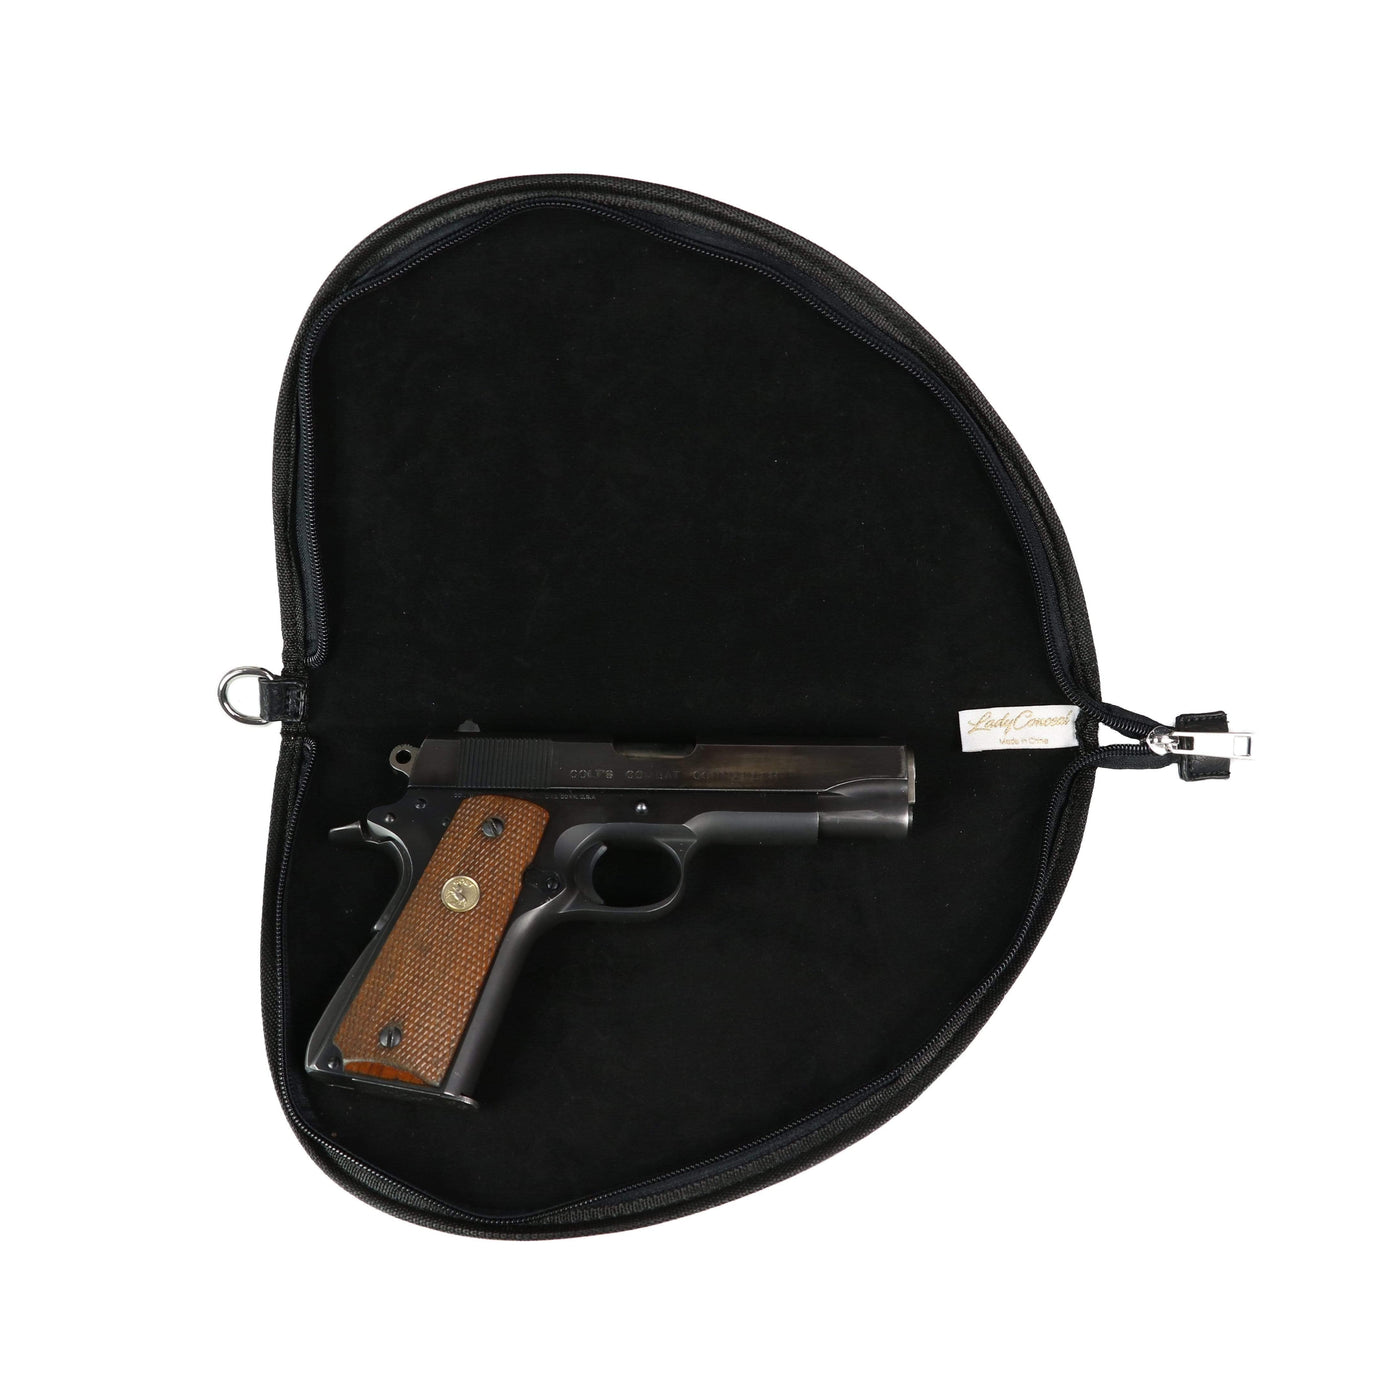 Lady Conceal Cases Large Soft Firearm Case